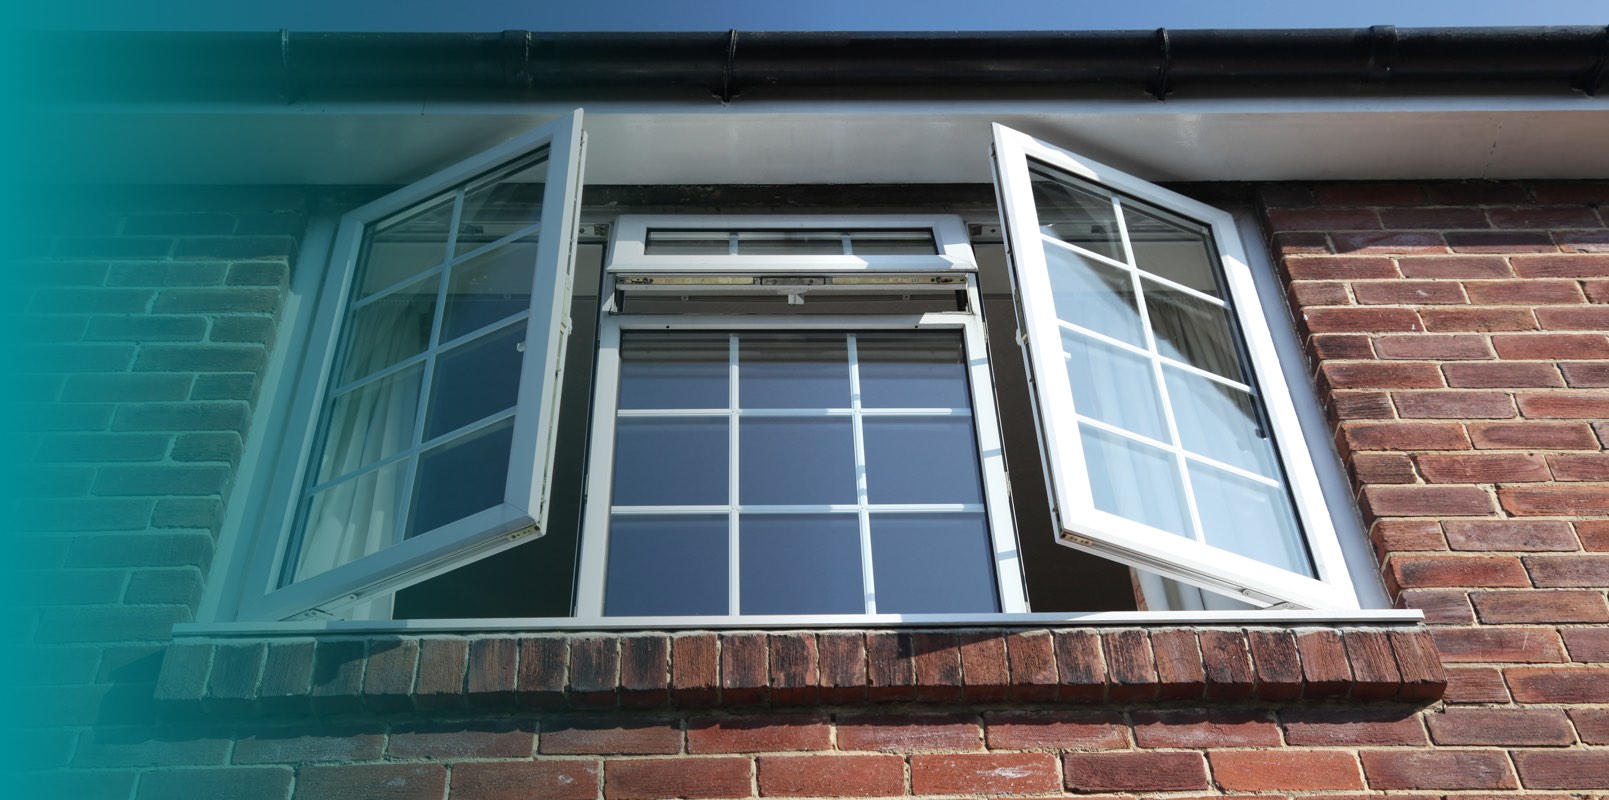 Will new windows and doors reduce energy costs?